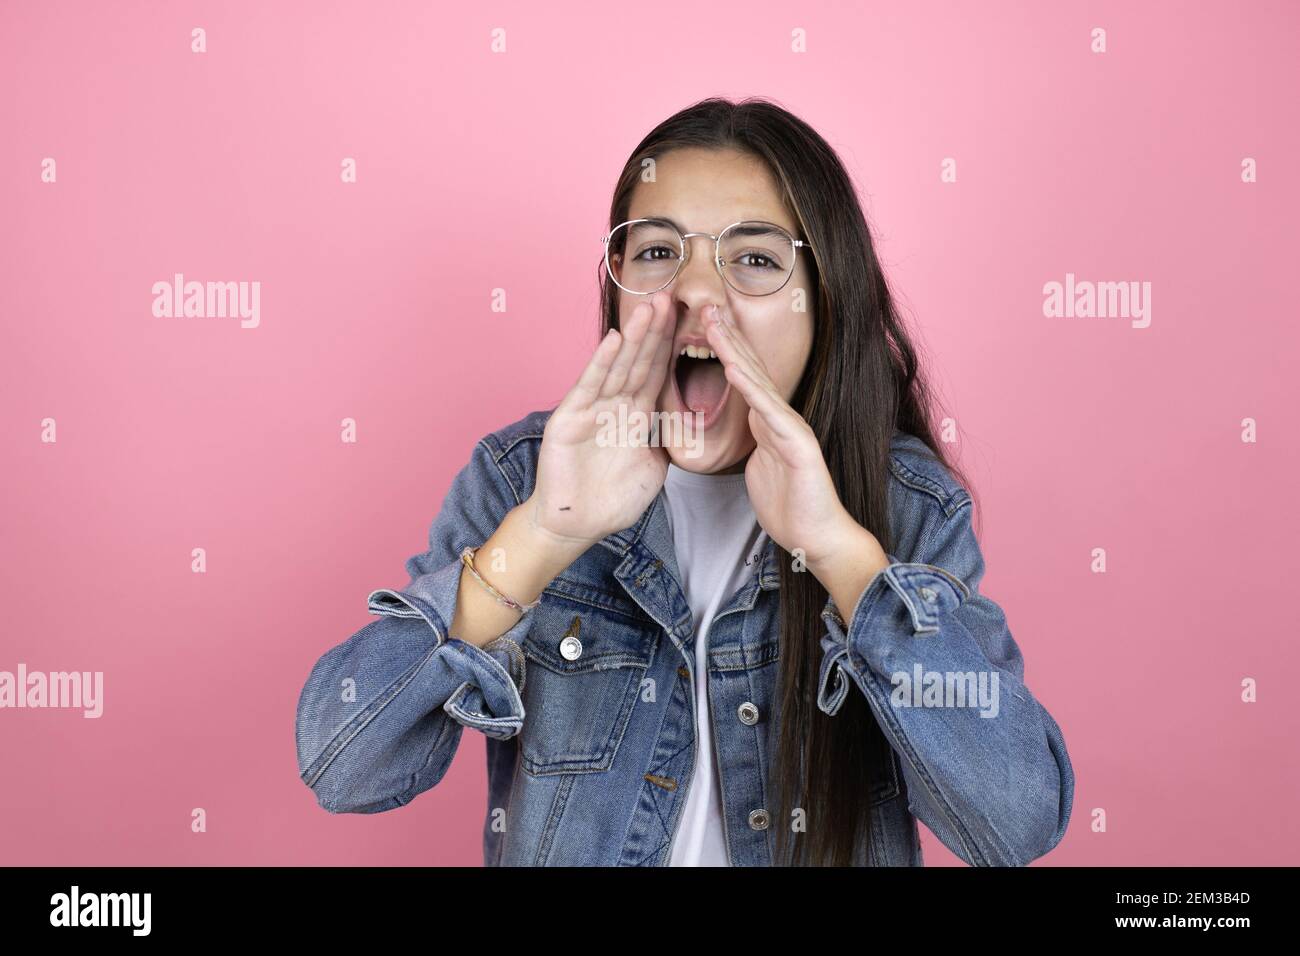 Beautiful child girl with long hair wearing a denim jacket standing over isolated pink background shouting and screaming loud to side with hands on mo Stock Photo